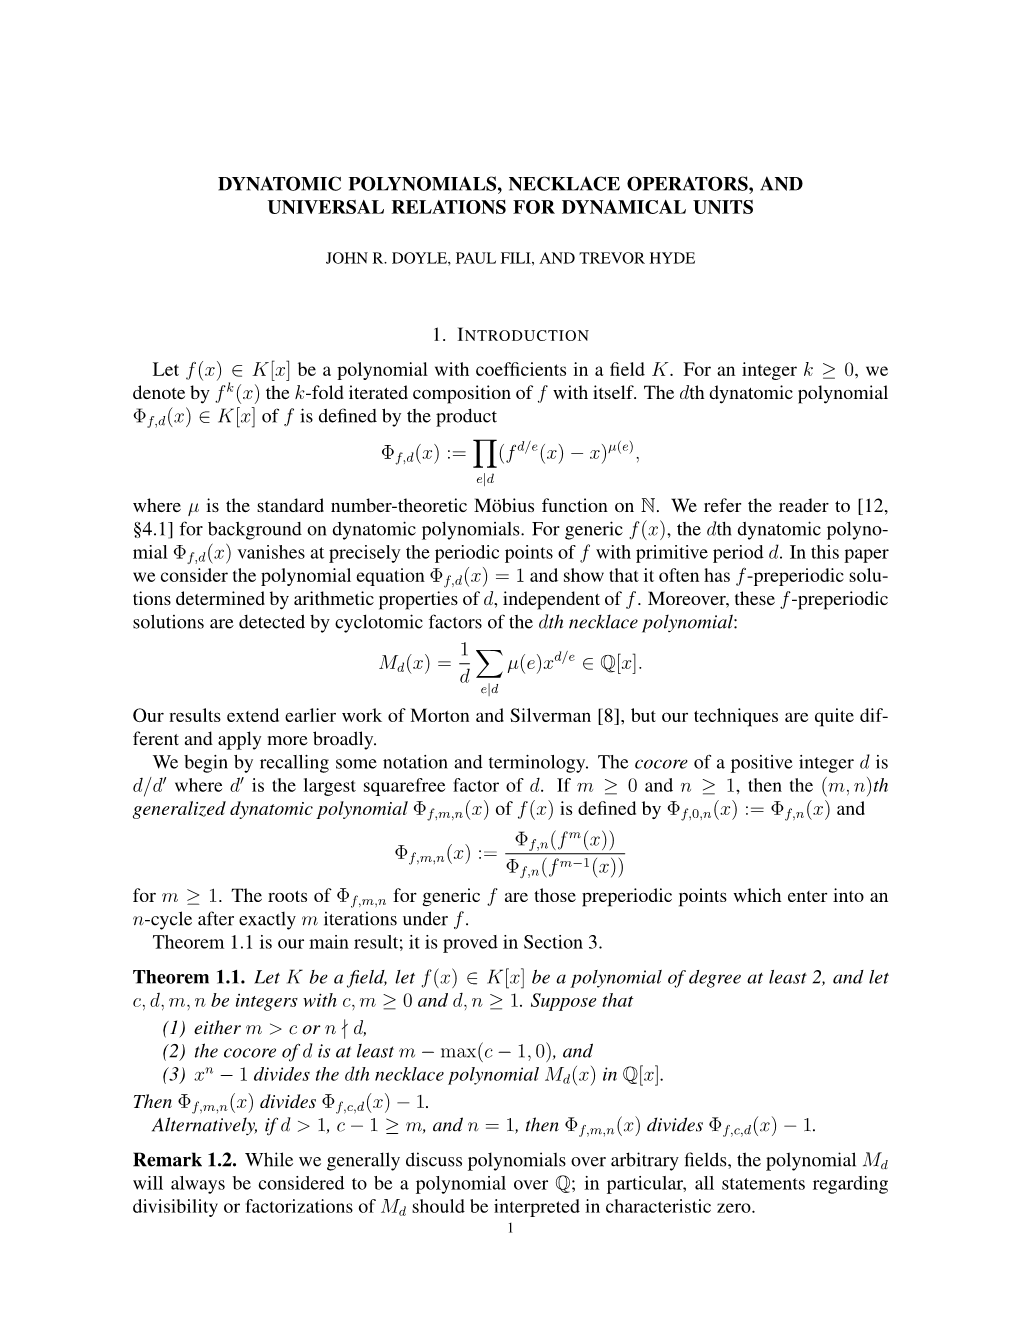 Dynatomic Polynomials, Necklace Operators, and Universal Relations for Dynamical Units